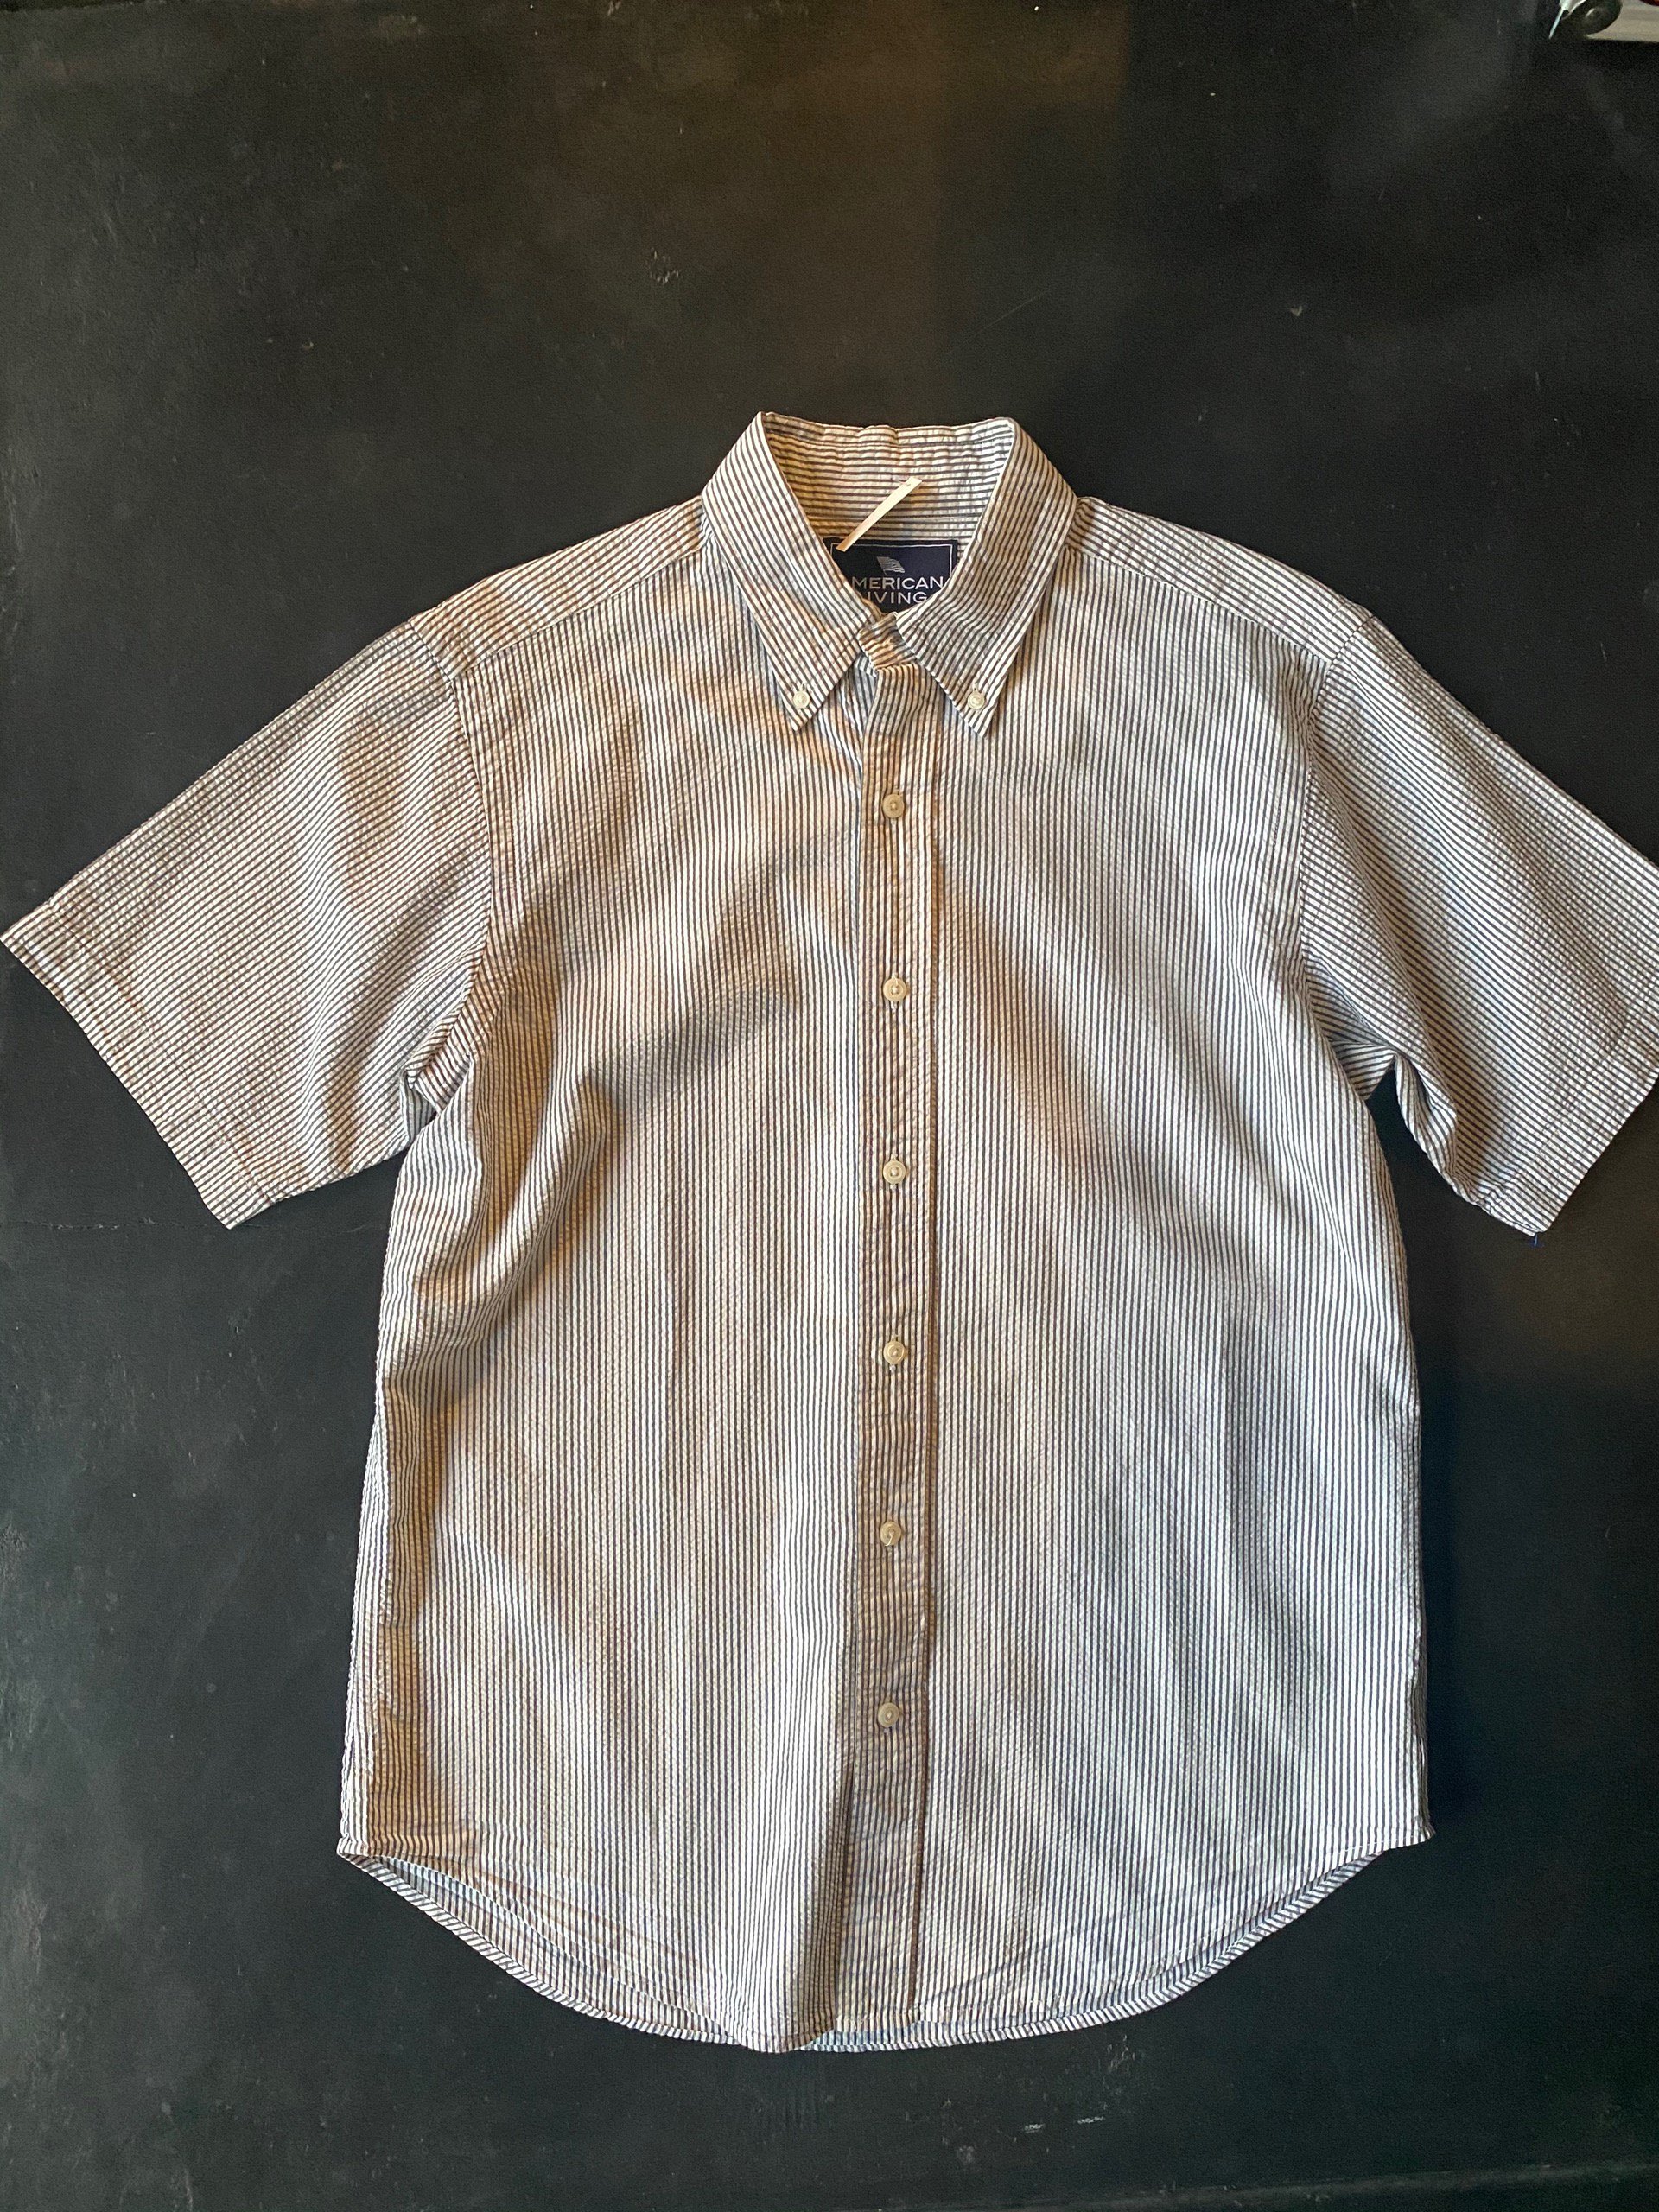 Used Strips Cotton Shirts Men's M but looks L